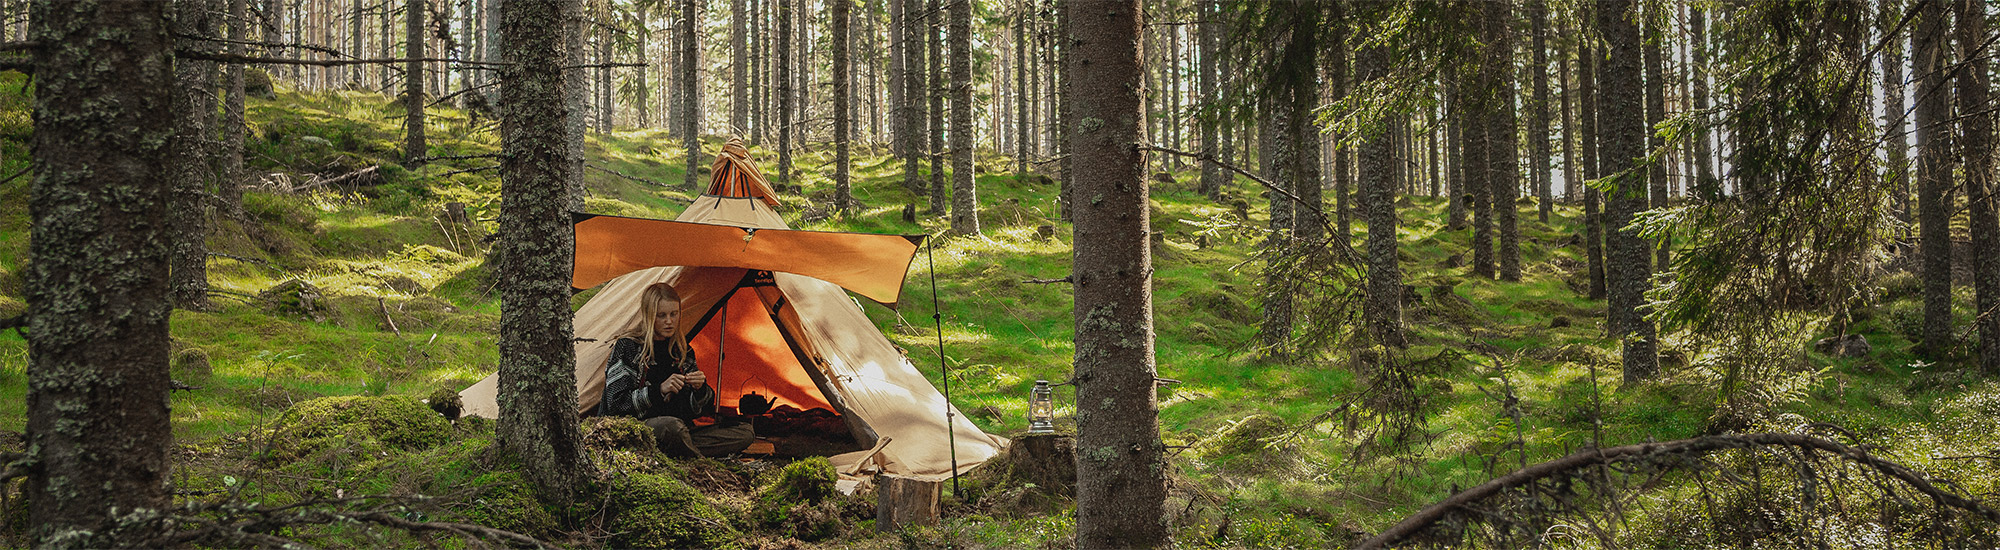 How to choose lightweight or cotton/polyester in your Nordic tipi if you are alone